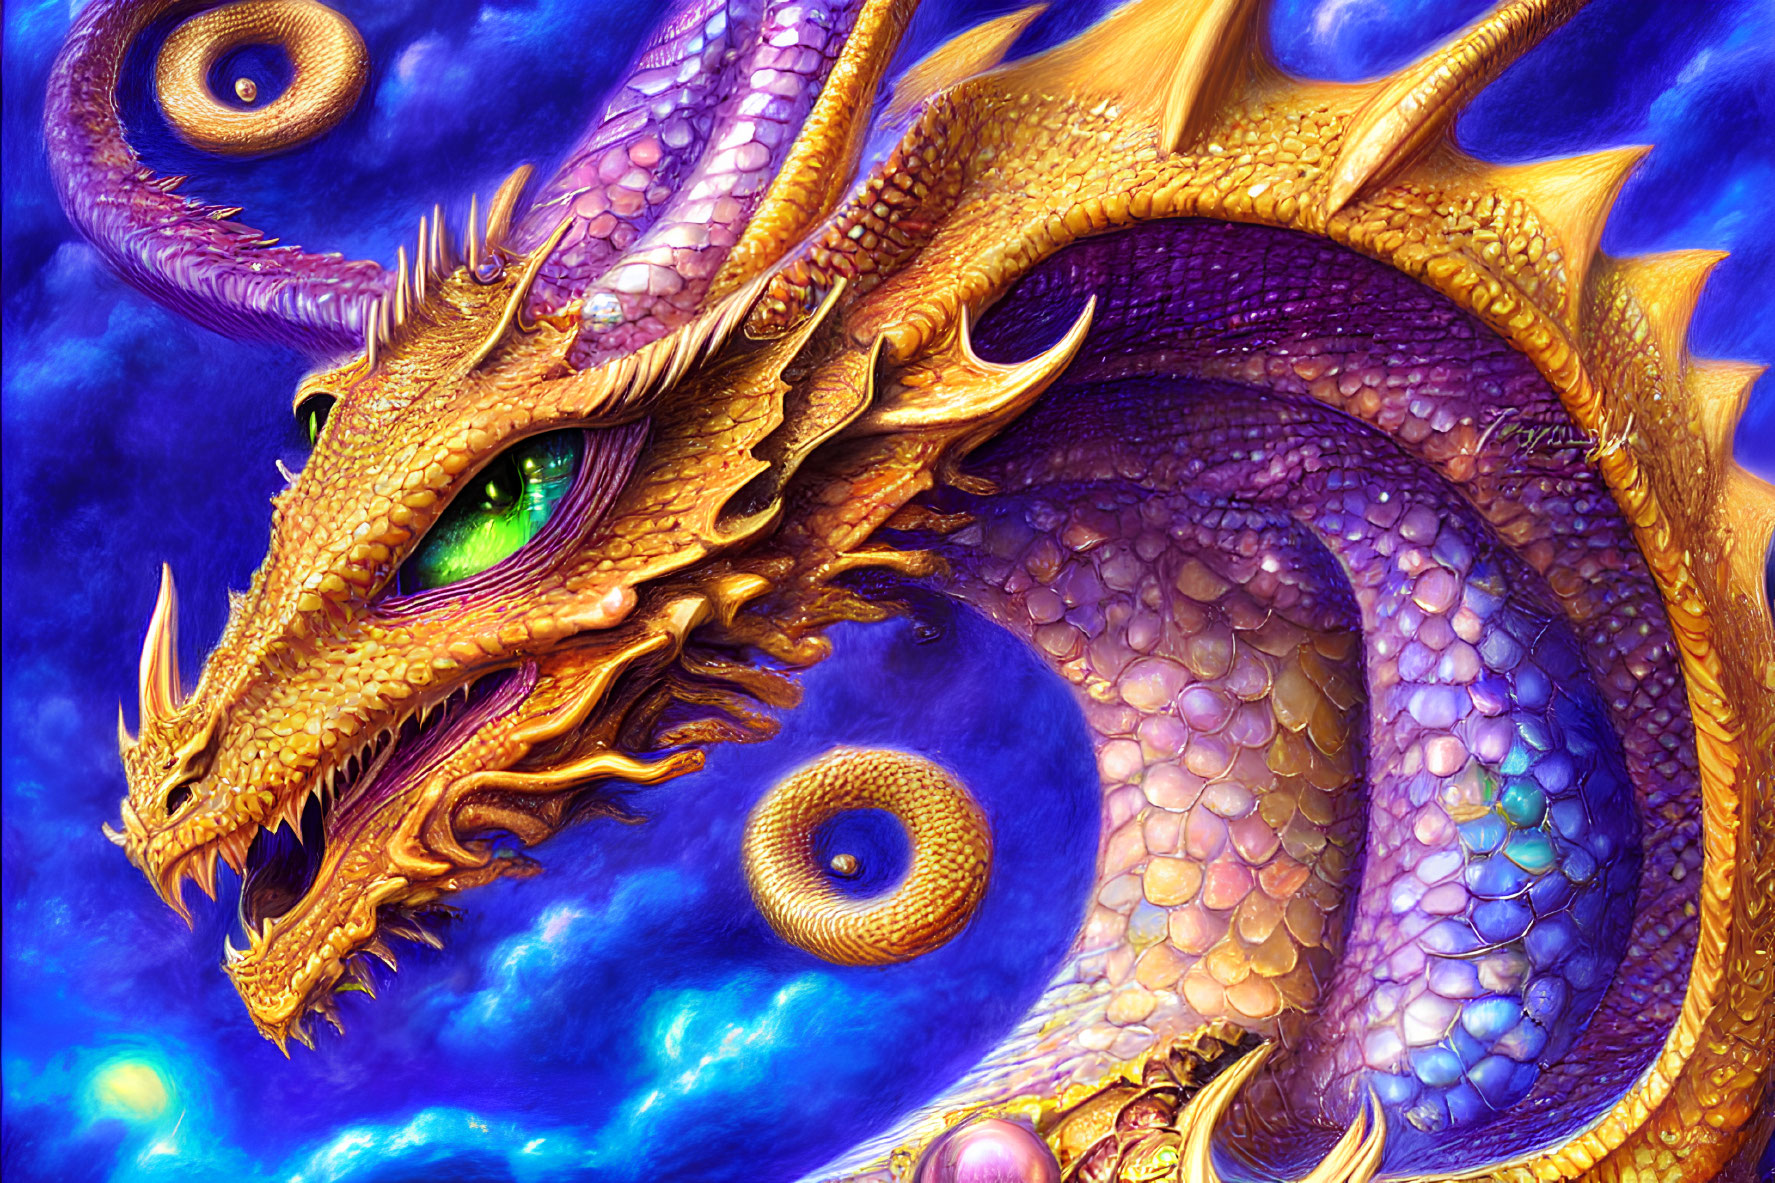 Golden dragon digital illustration with intricate scales and cosmic background